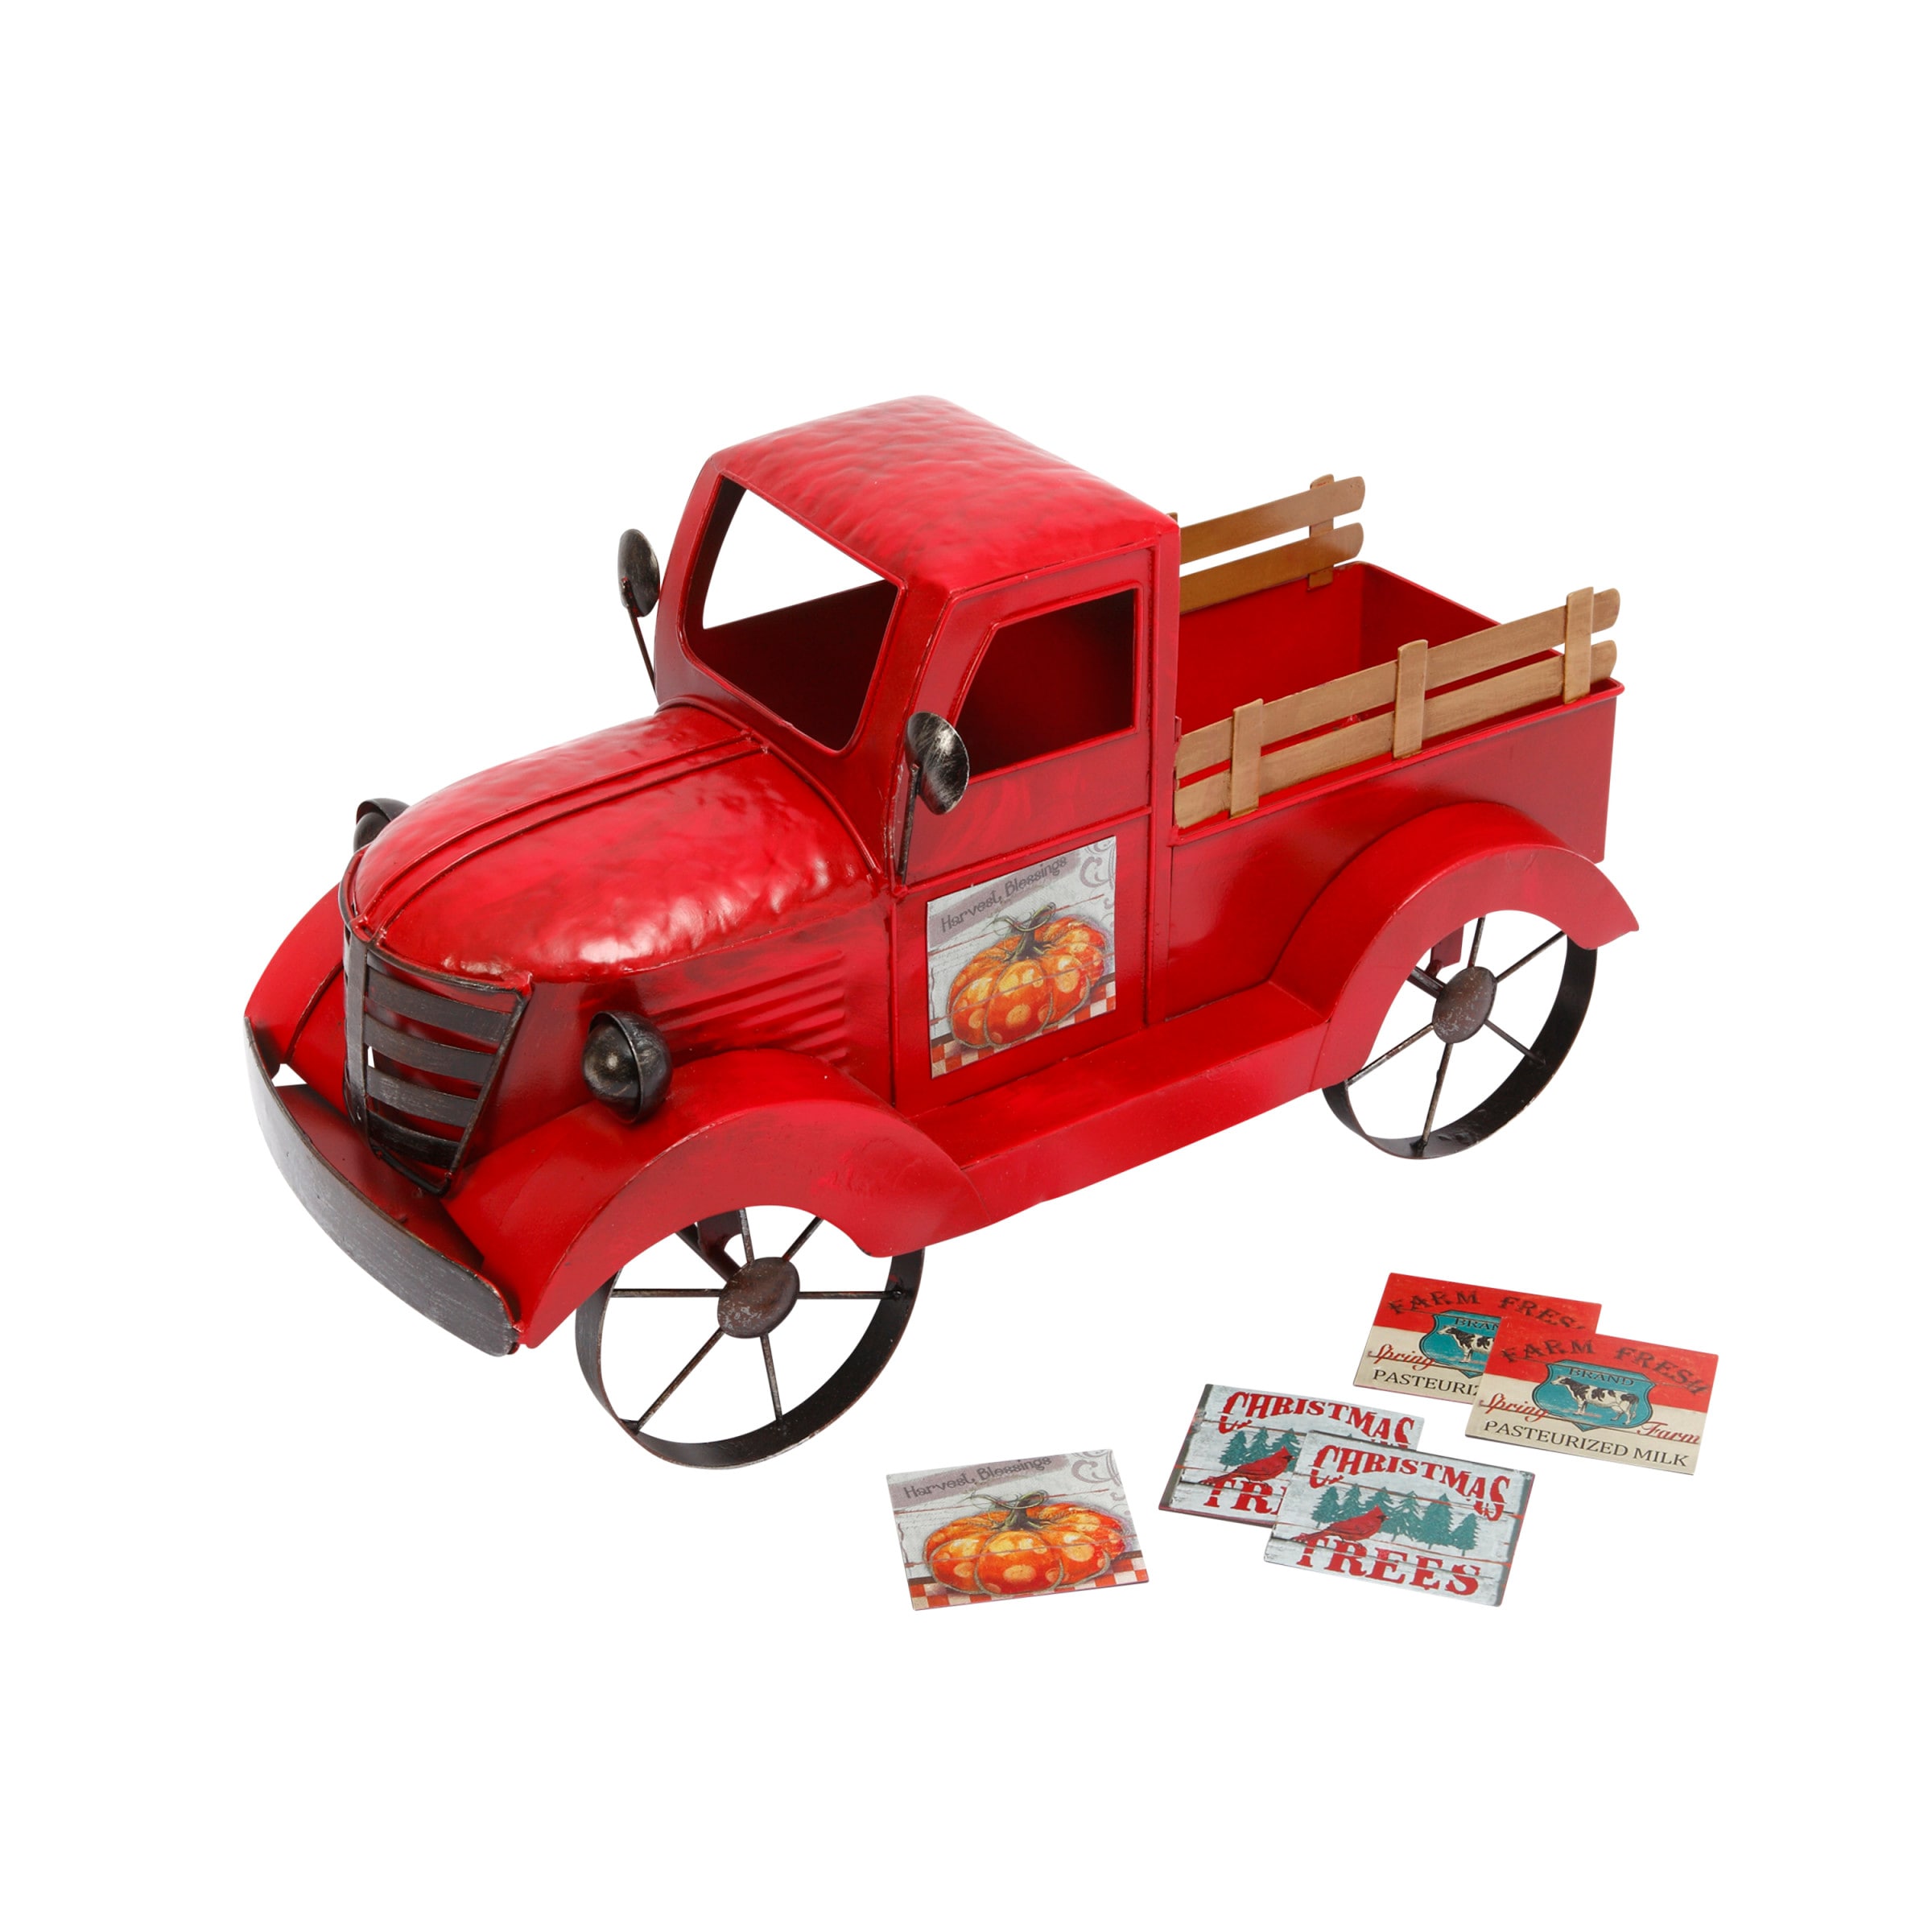 Gerson International 1063 In Truck Christmas Decor In The Christmas